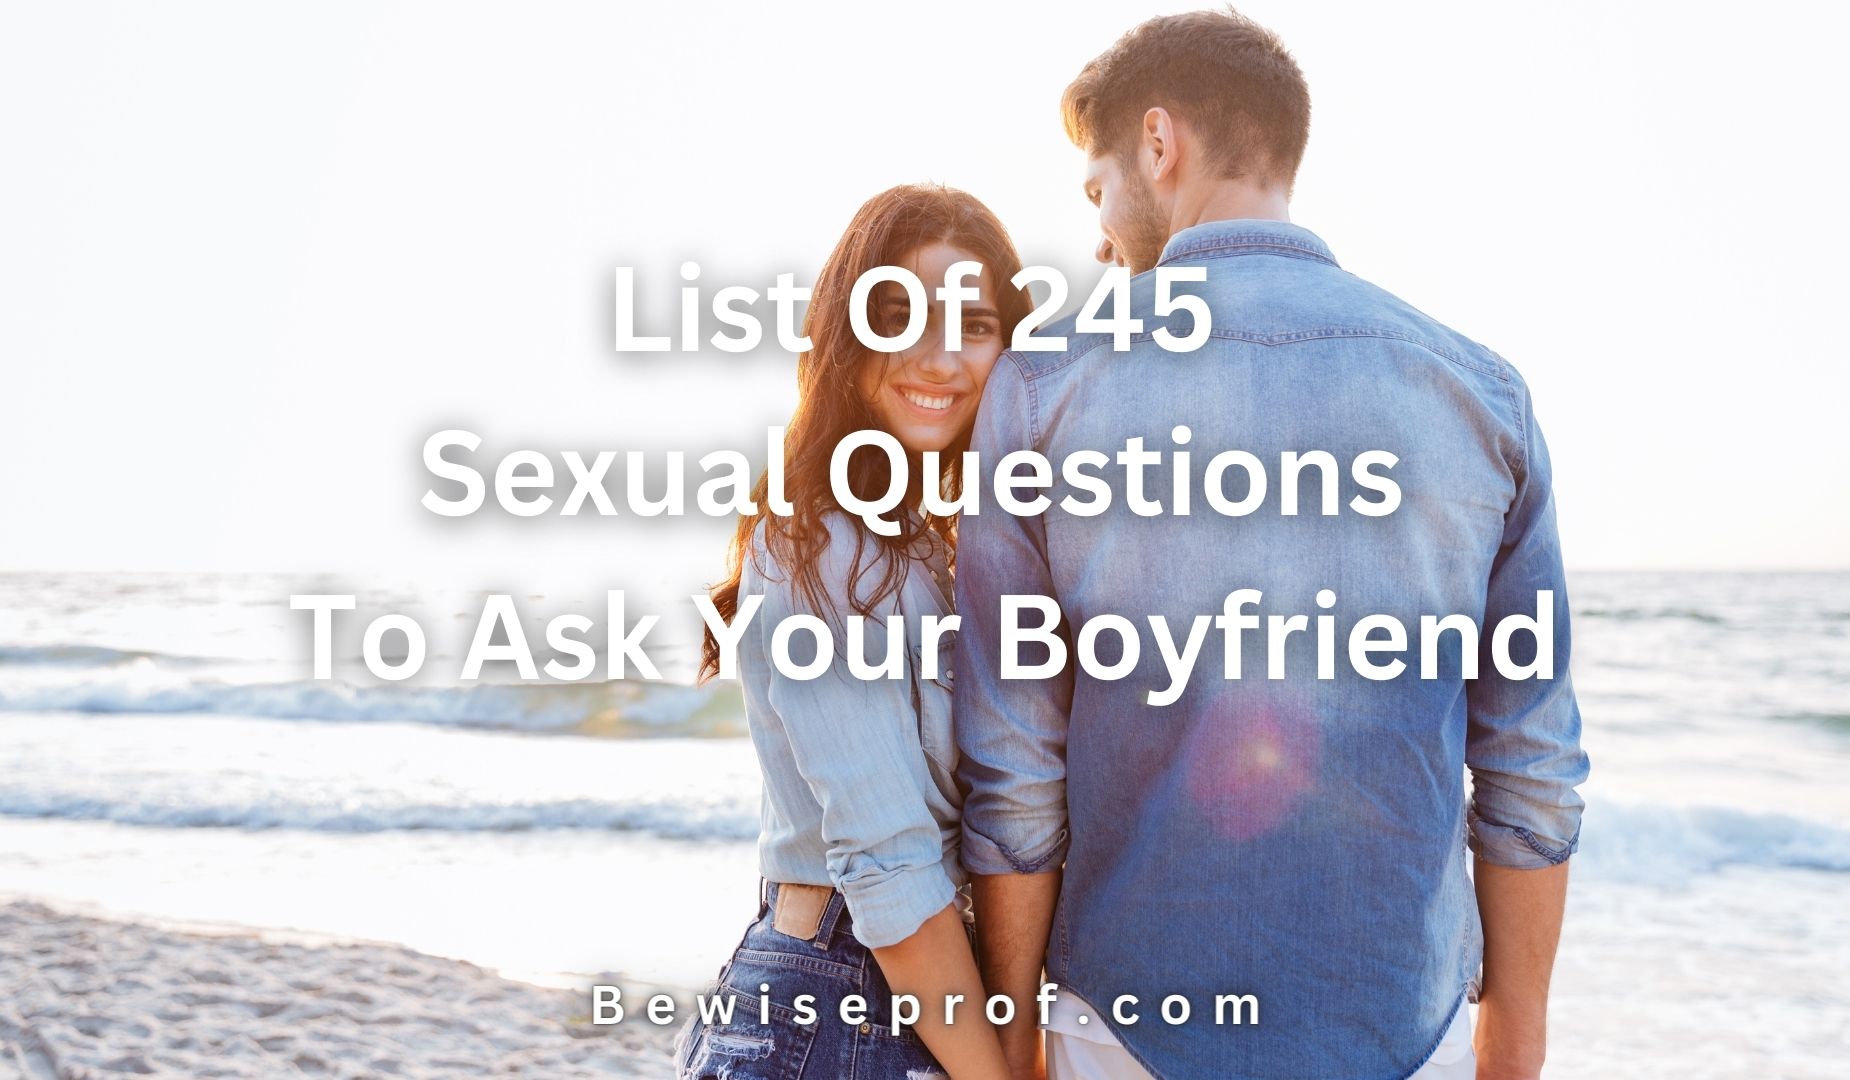 List Of 245 Sexual Questions To Ask Your Boyfriend